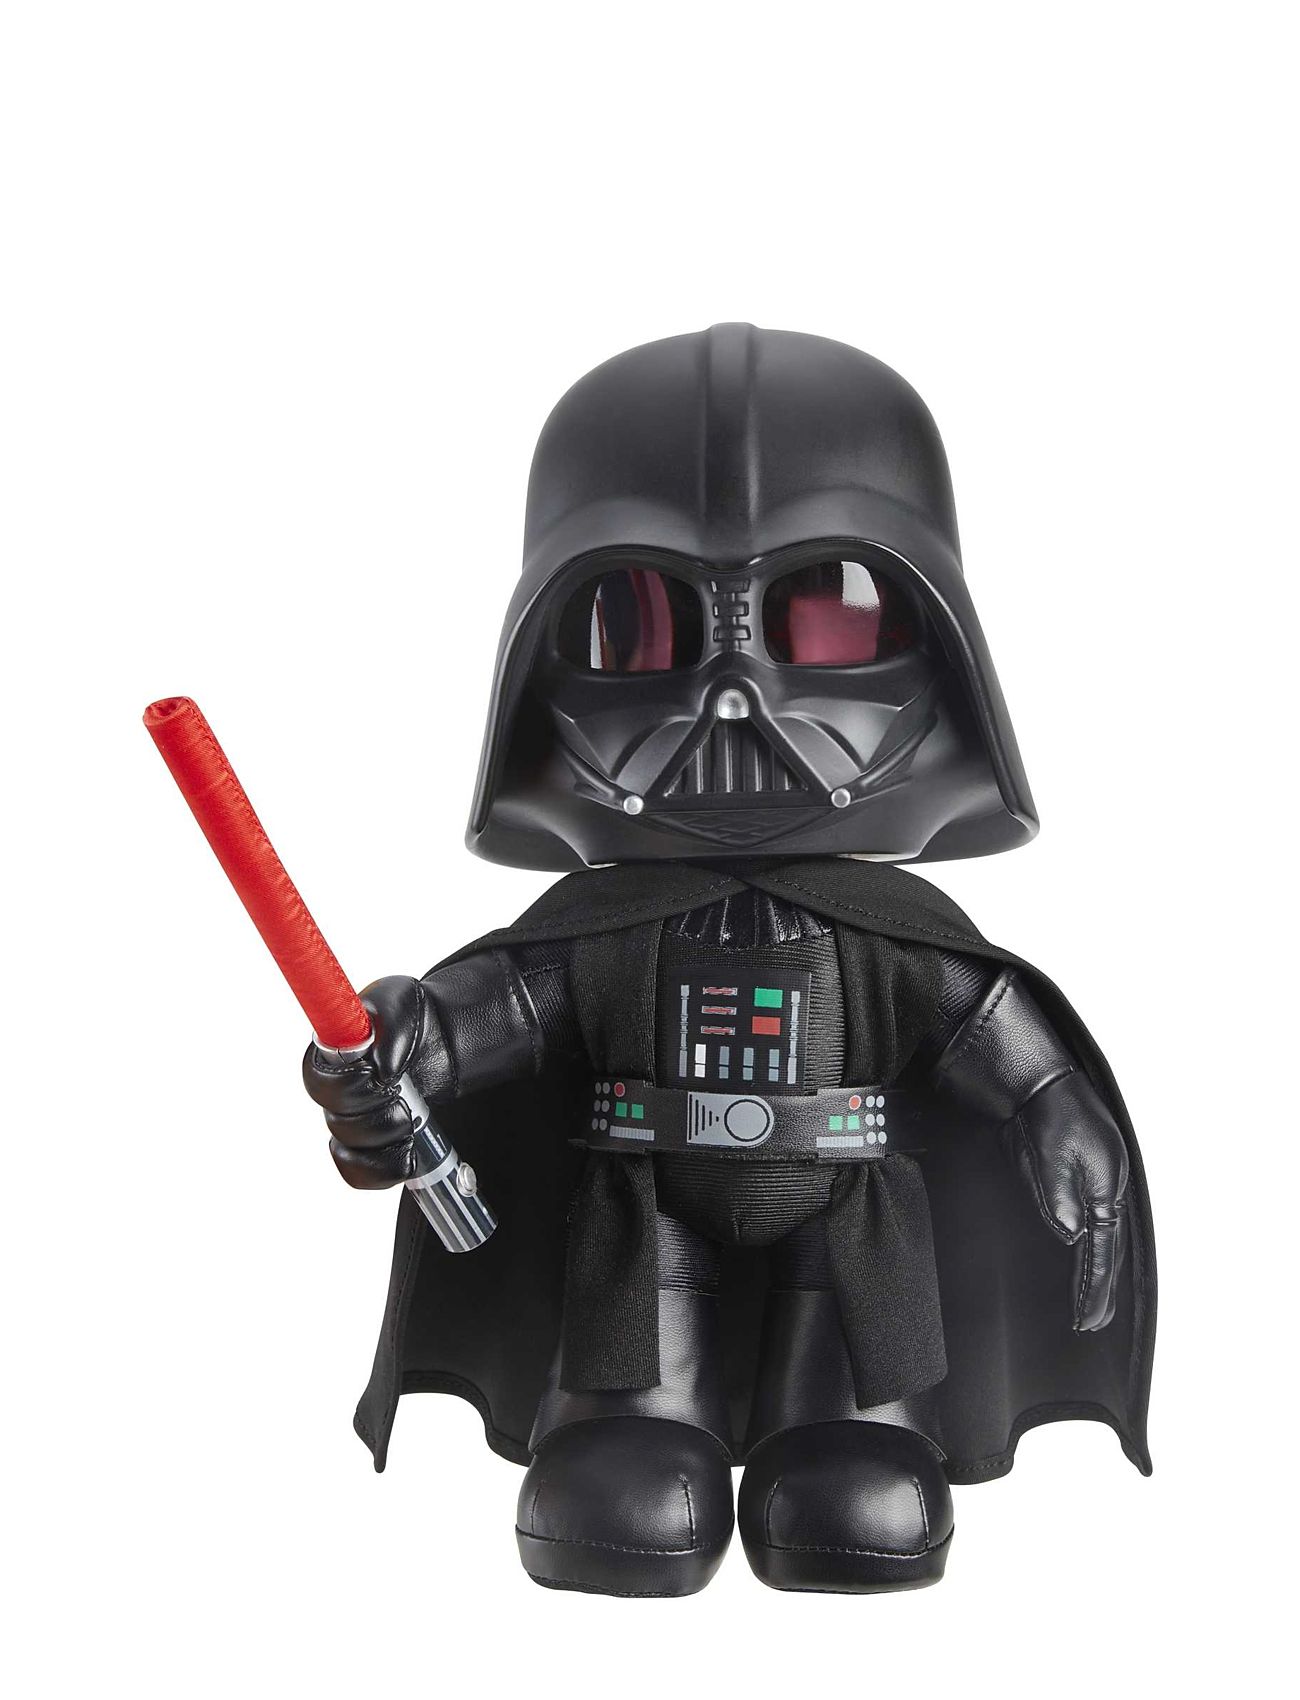 Star Wars Darth Vader Voice Manipulator Feature Plush Toys Playsets & Action Figures Action Figures Multi/patterned Star Wars